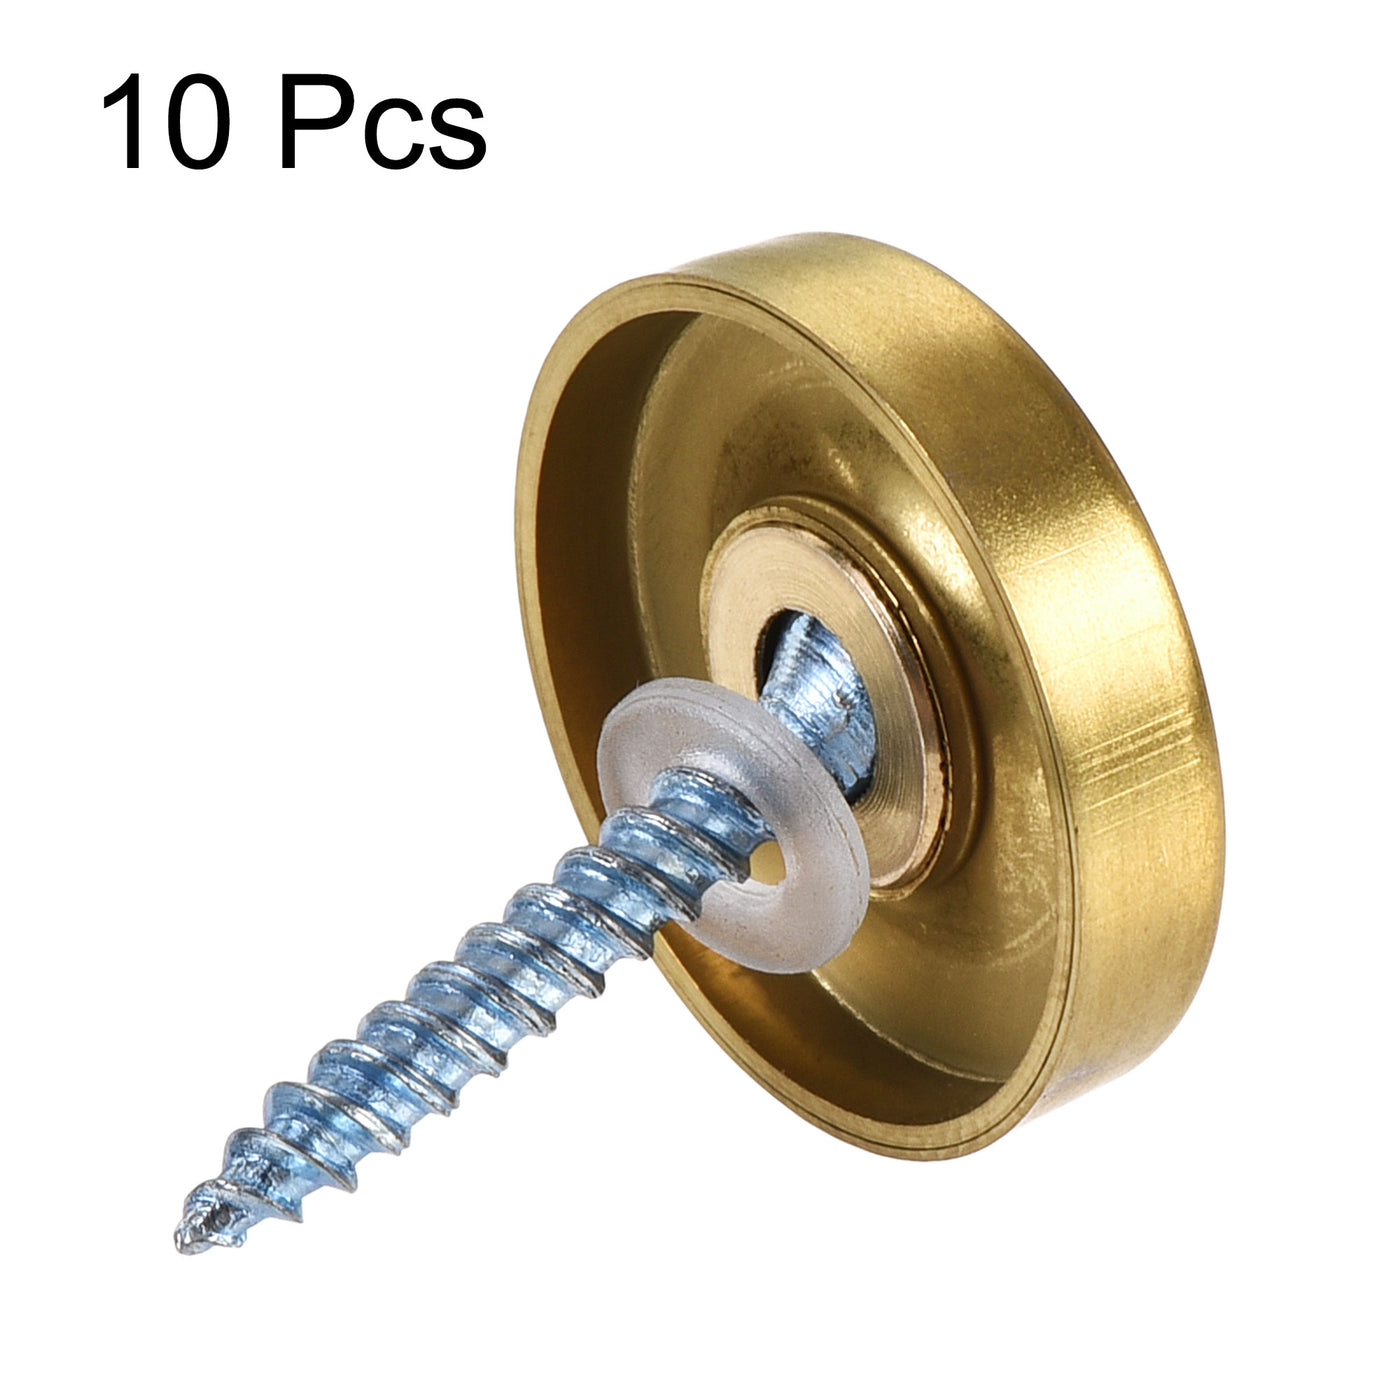 uxcell Uxcell Mirror Screws, 22mm/0.87", 10pcs Decorative Cap Fasteners Cover Nails, Wire Drawing, Gold Tone 304 Stainless Steel